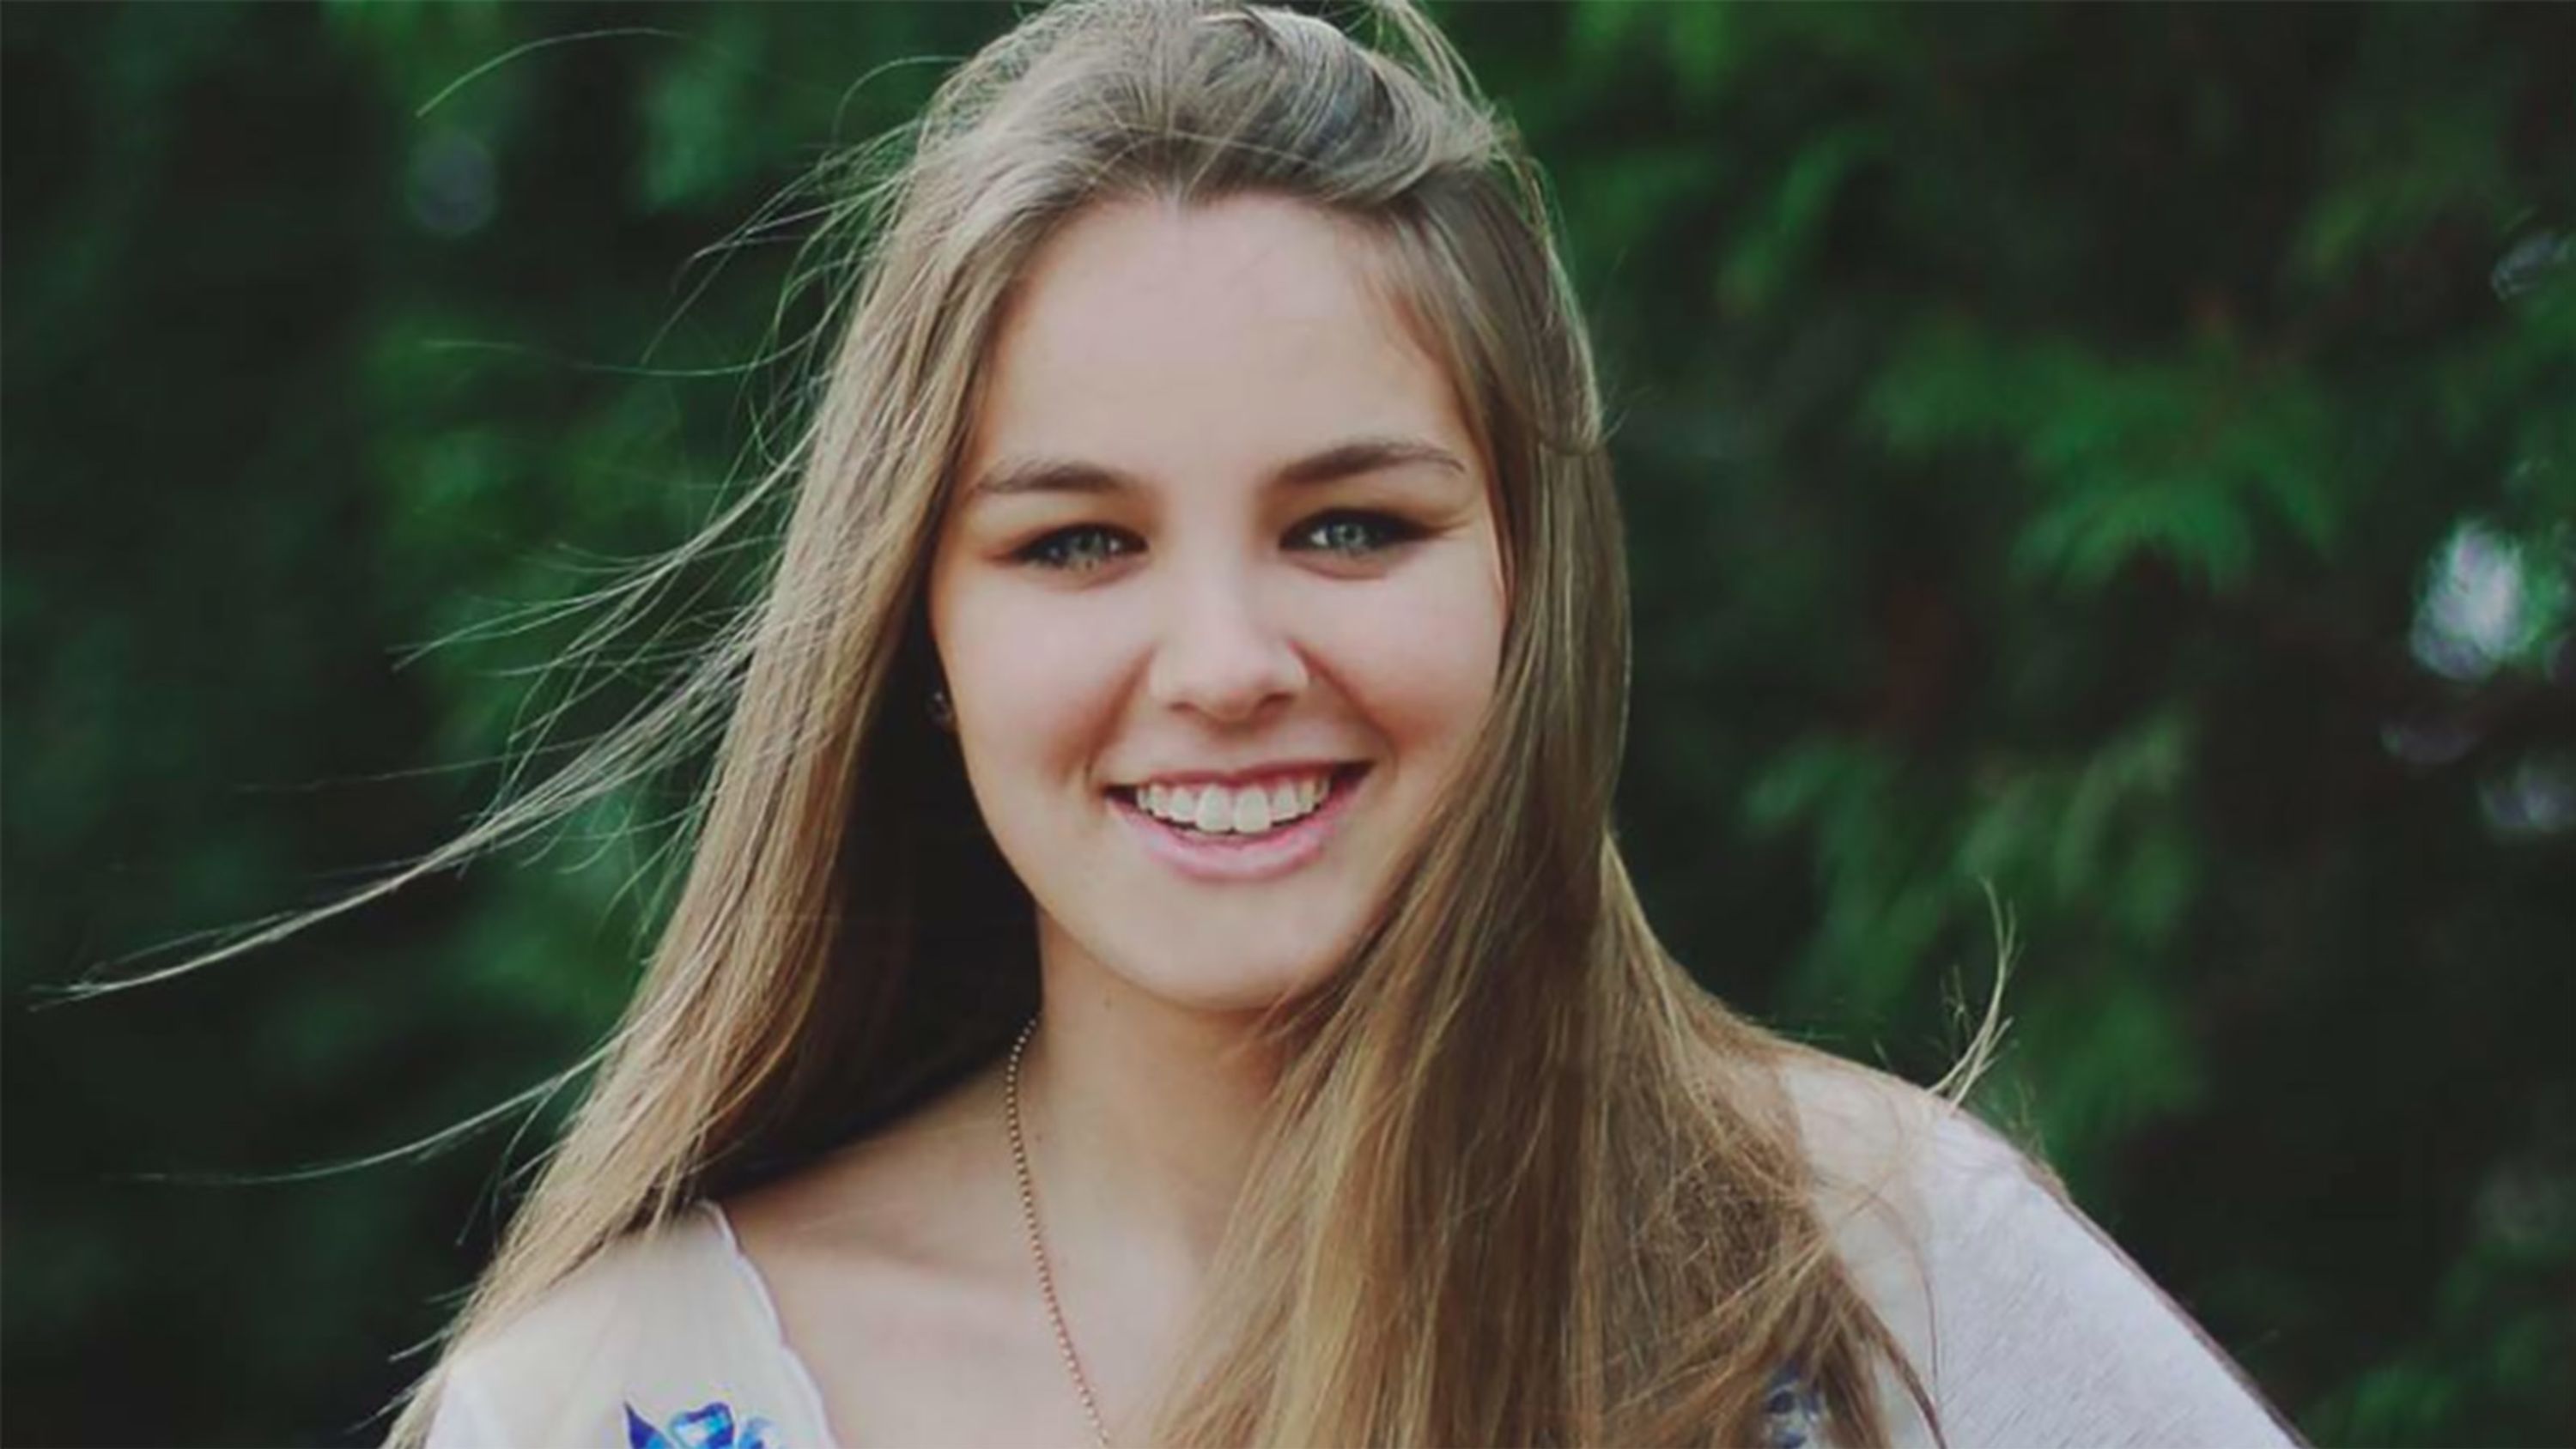 Saoirse Kennedy Hill <a href="index.php?page=&url=https%3A%2F%2Fwww.cnn.com%2F2019%2F08%2F01%2Fus%2Fkennedy-compound-emergency%2Findex.html" target="_blank">died in August 2019</a> at the family home in Hyannis Port, Massachusetts. Her mother, Courtney Kennedy Hill, was one of the 11 children of the late Robert F. Kennedy and his human rights activist wife, Ethel Kennedy.